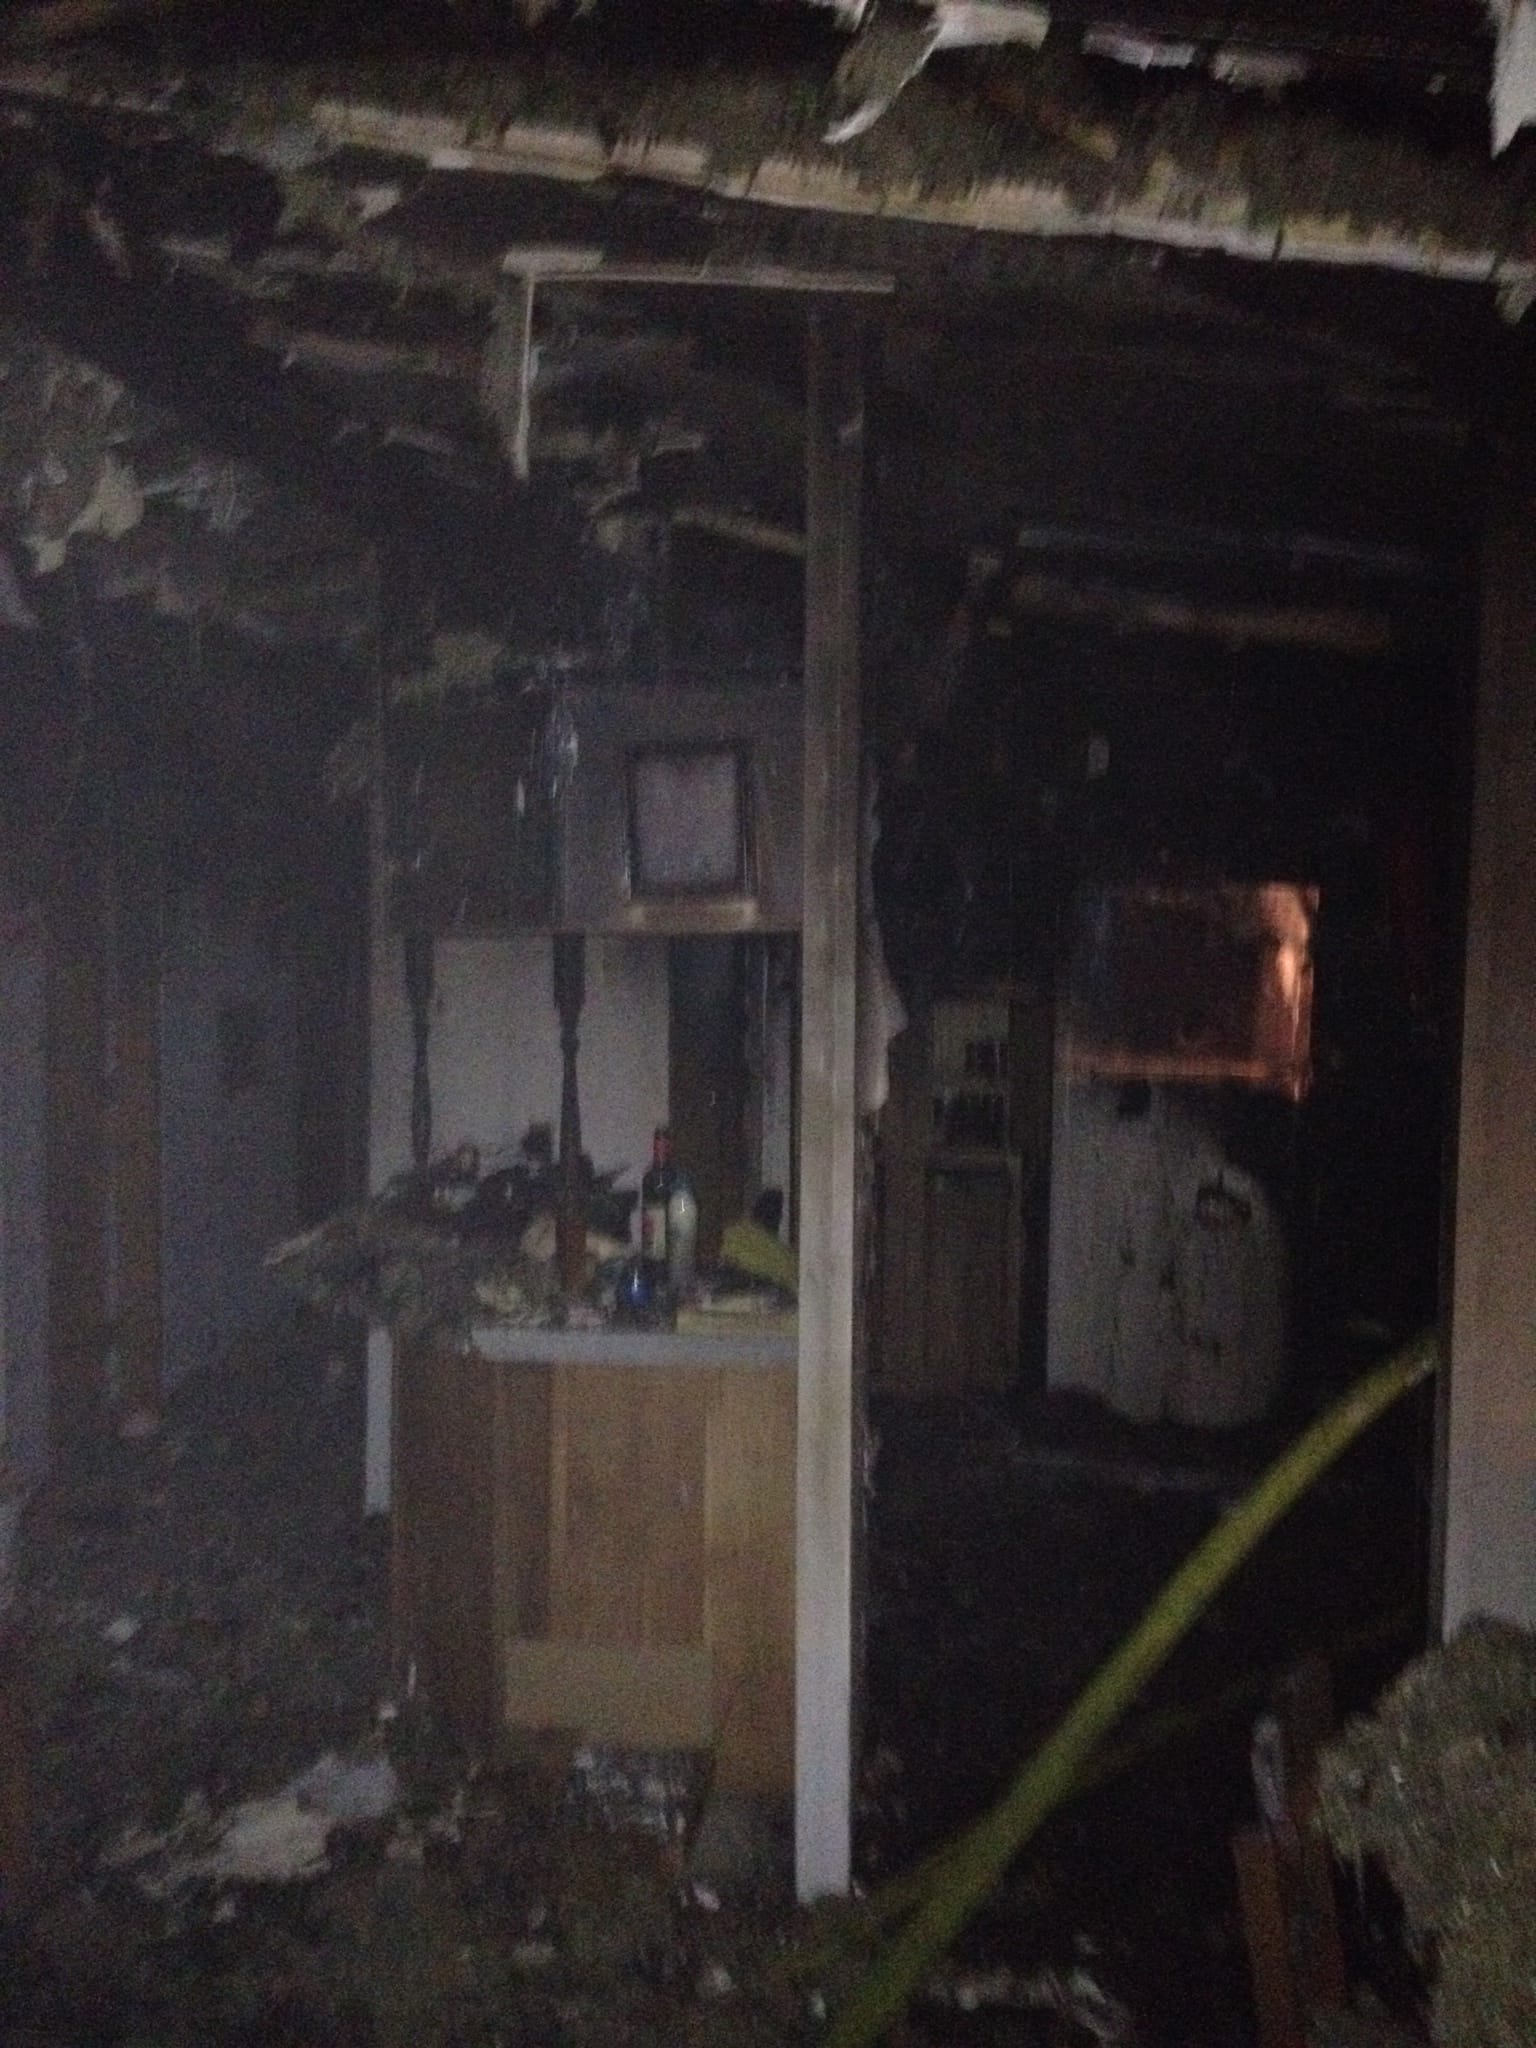 A fire destroyed the kitchen of a manufactured home in the Dollars Corner area west of Battle Ground Wednesday evening. The fire started in the kitchen.